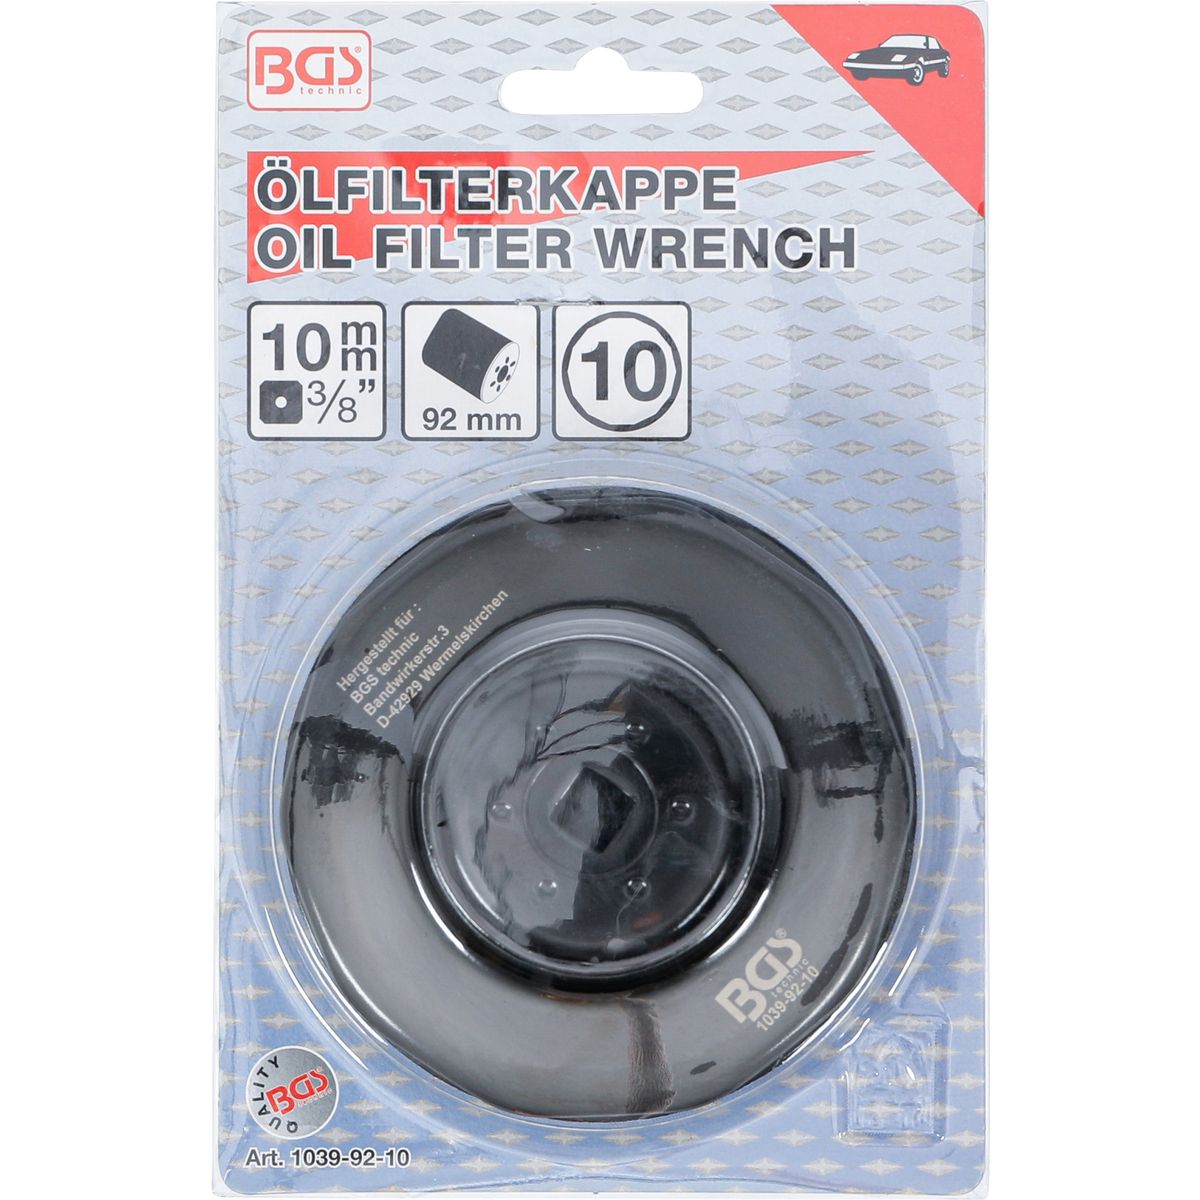 Oil Filter Wrench | 10-point | Ø 92 mm | for Fiat, Lancia